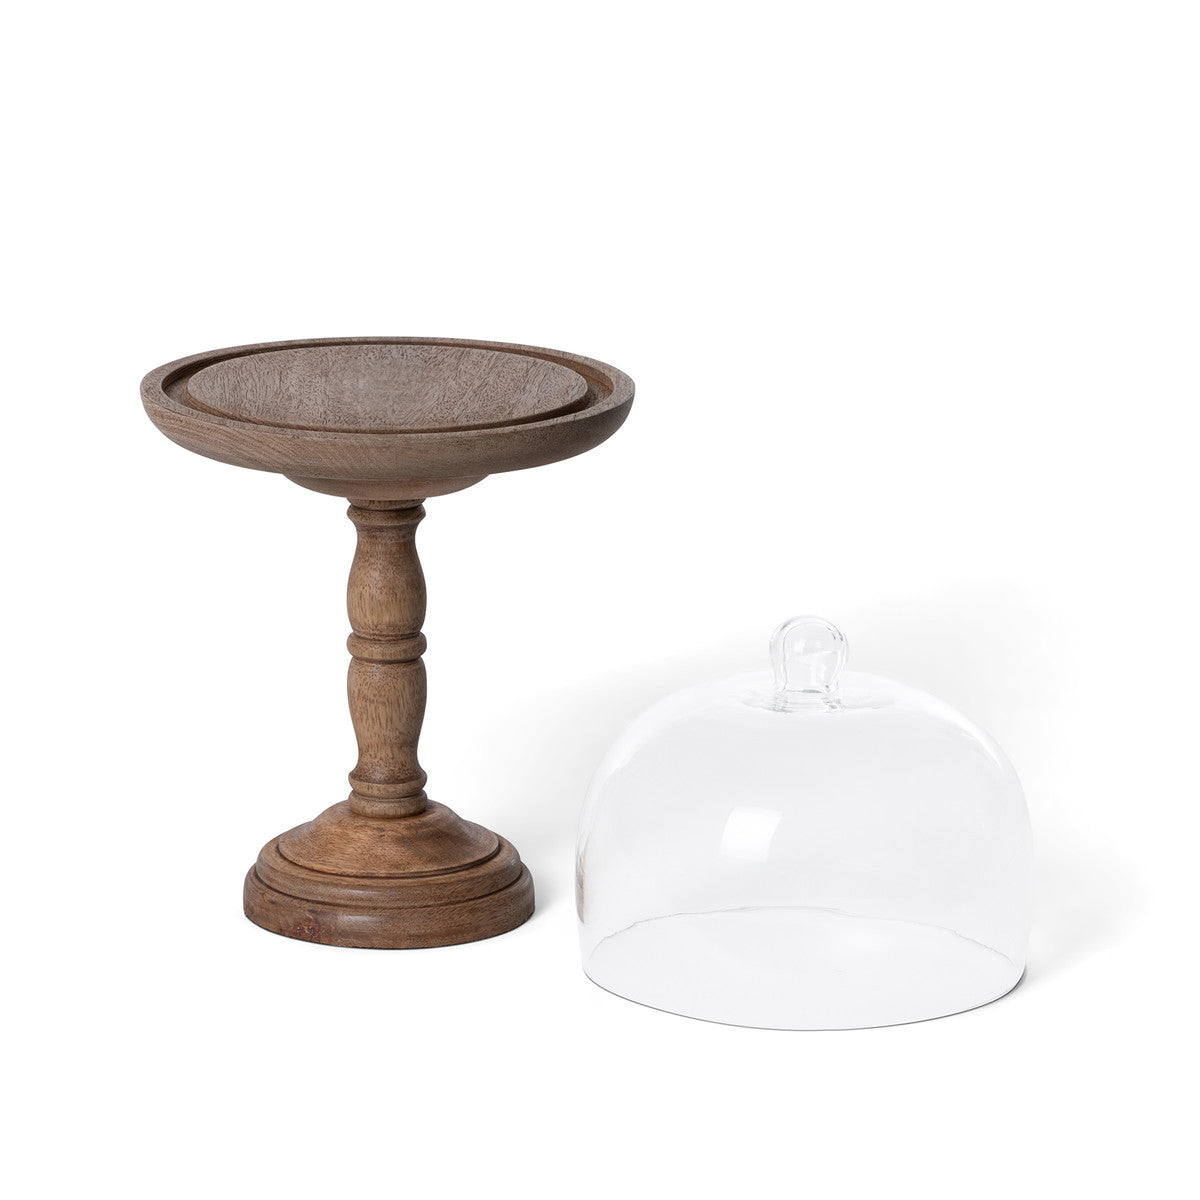 Elevated Wood Server with Glass Dome - 16"